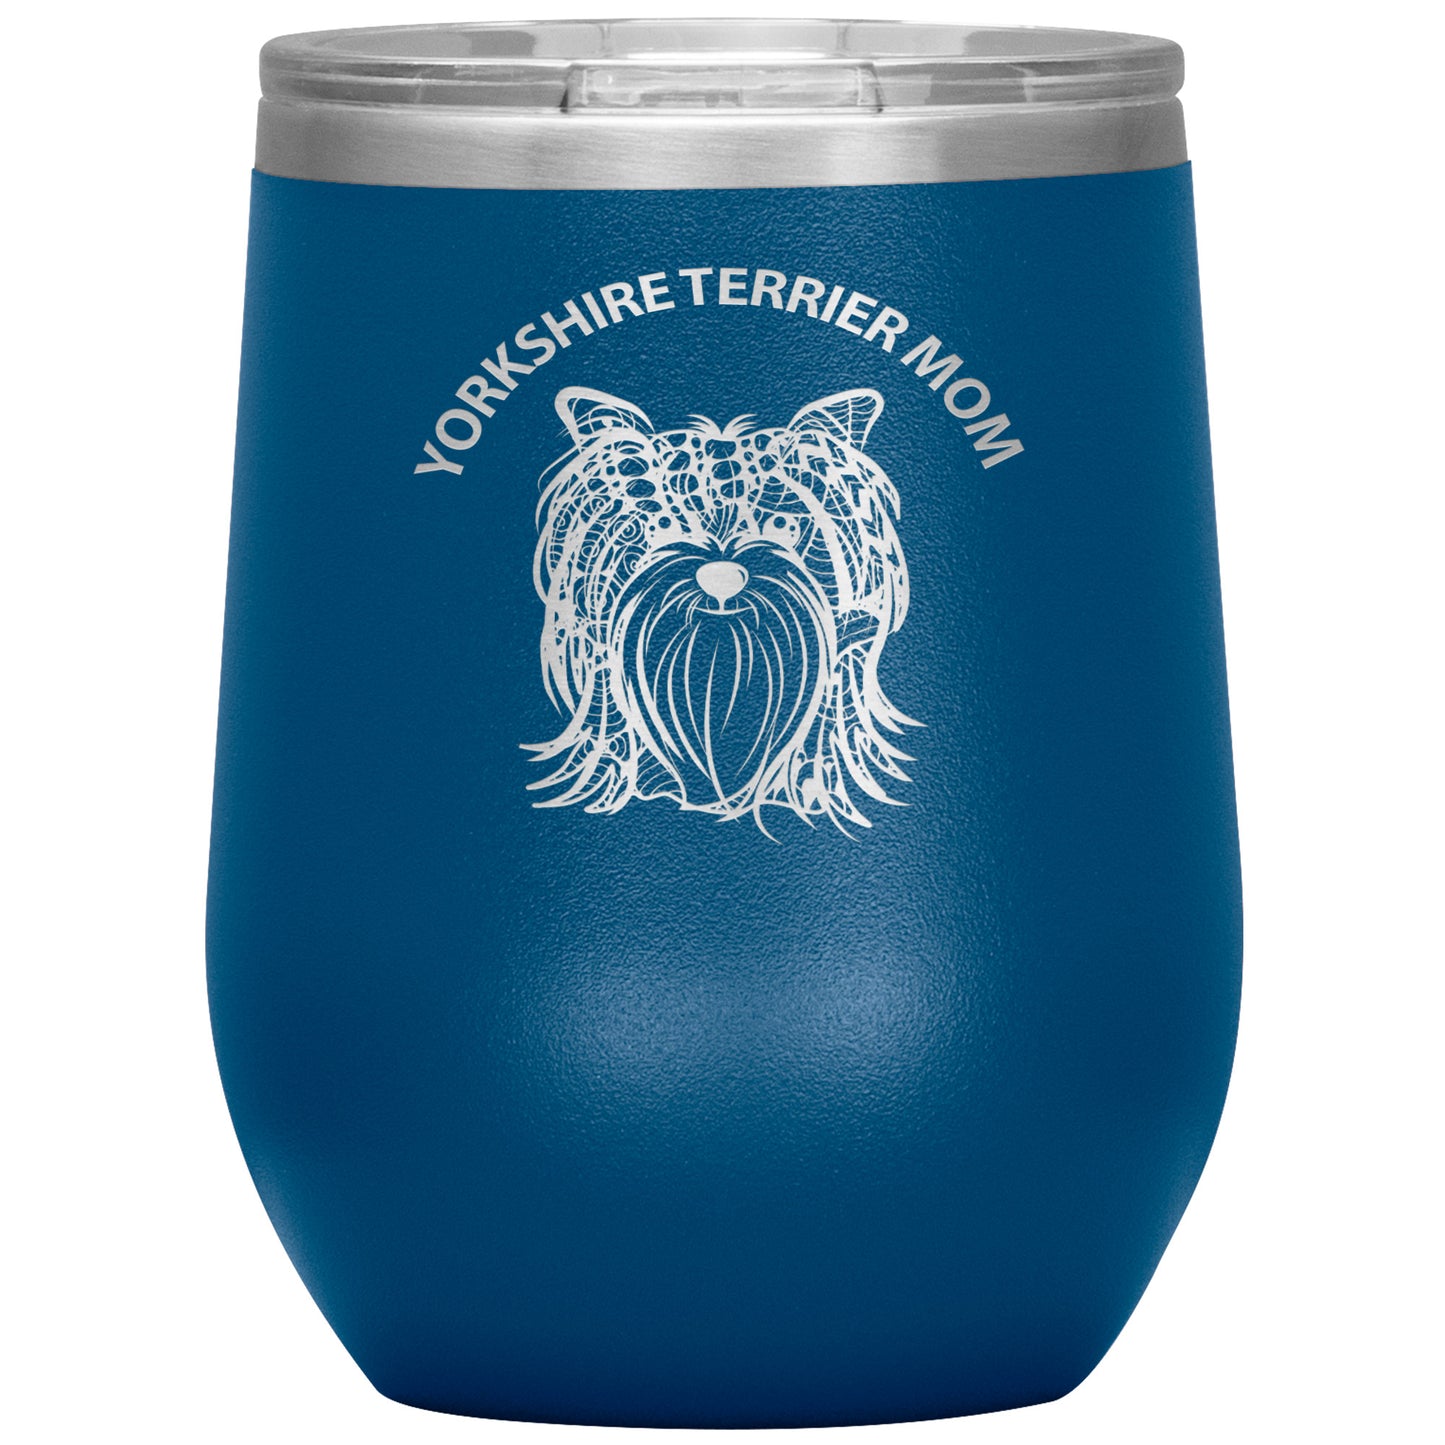 Yorkshire Terrier (Yorkie) Mom Design 12oz Insulated Stemless Wine Tumbler - Cindy Sang B&W